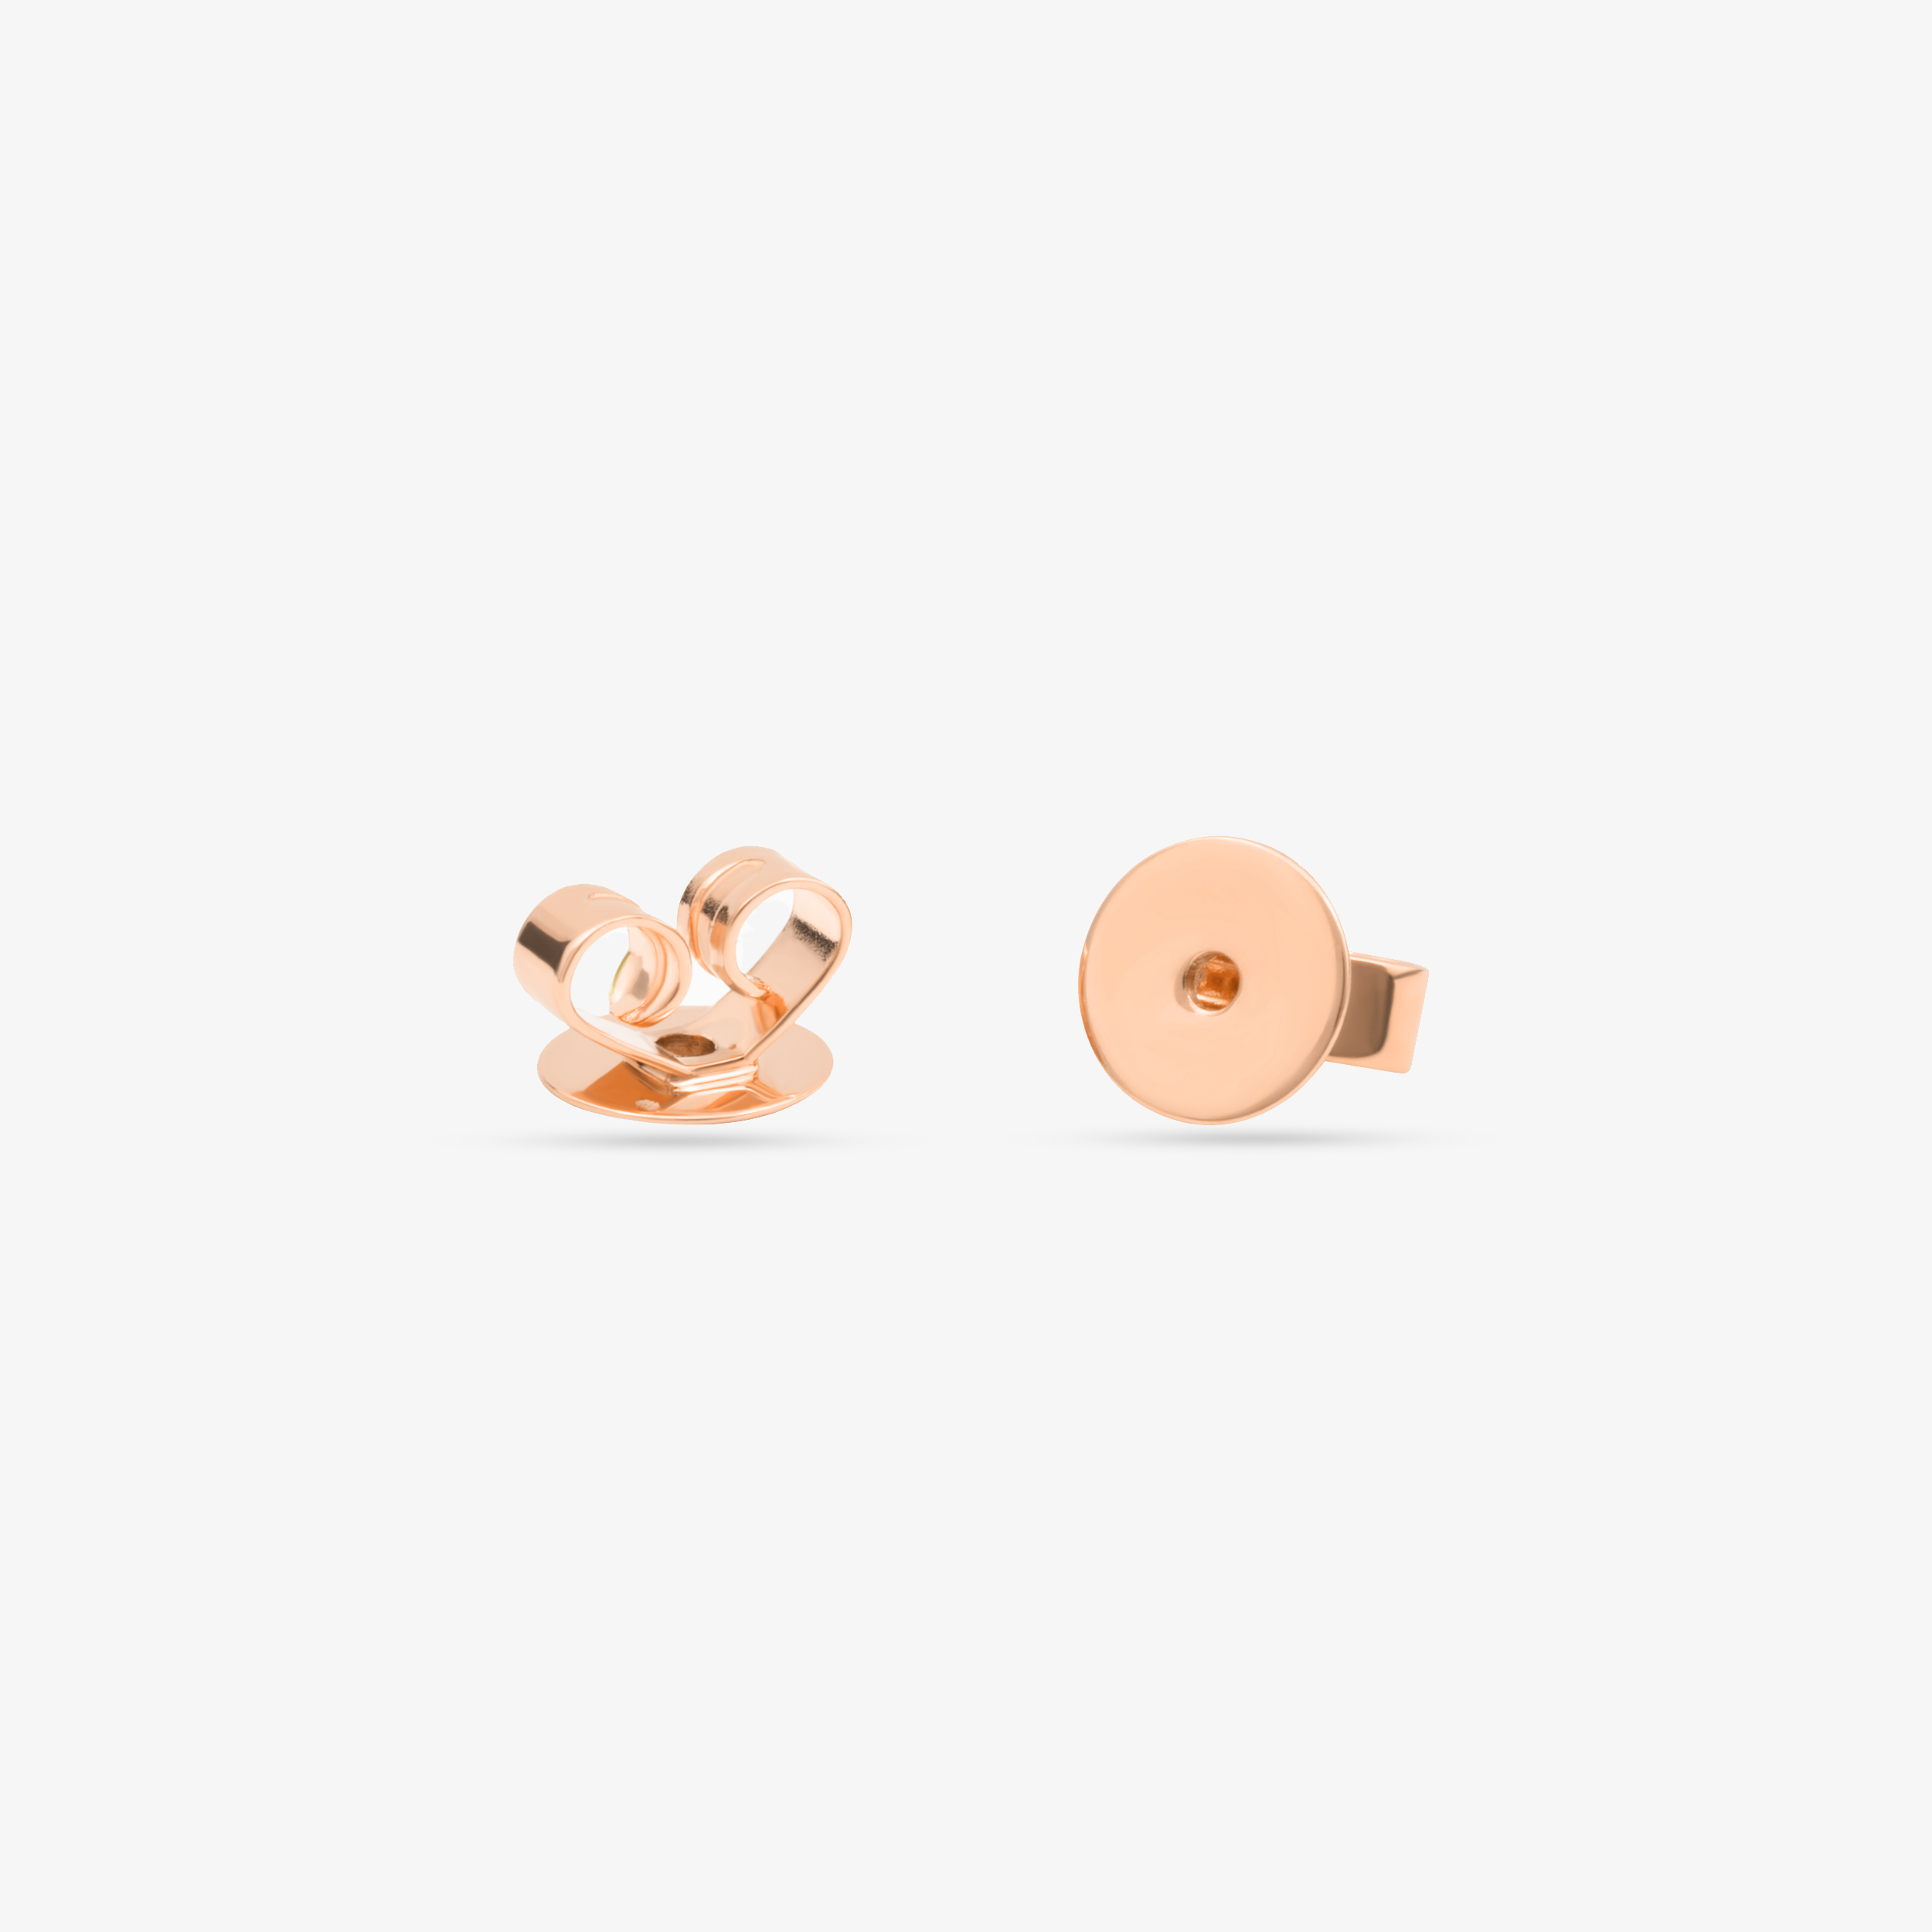 Clover Earrings In 18K Solid Rose Gold With Diamonds